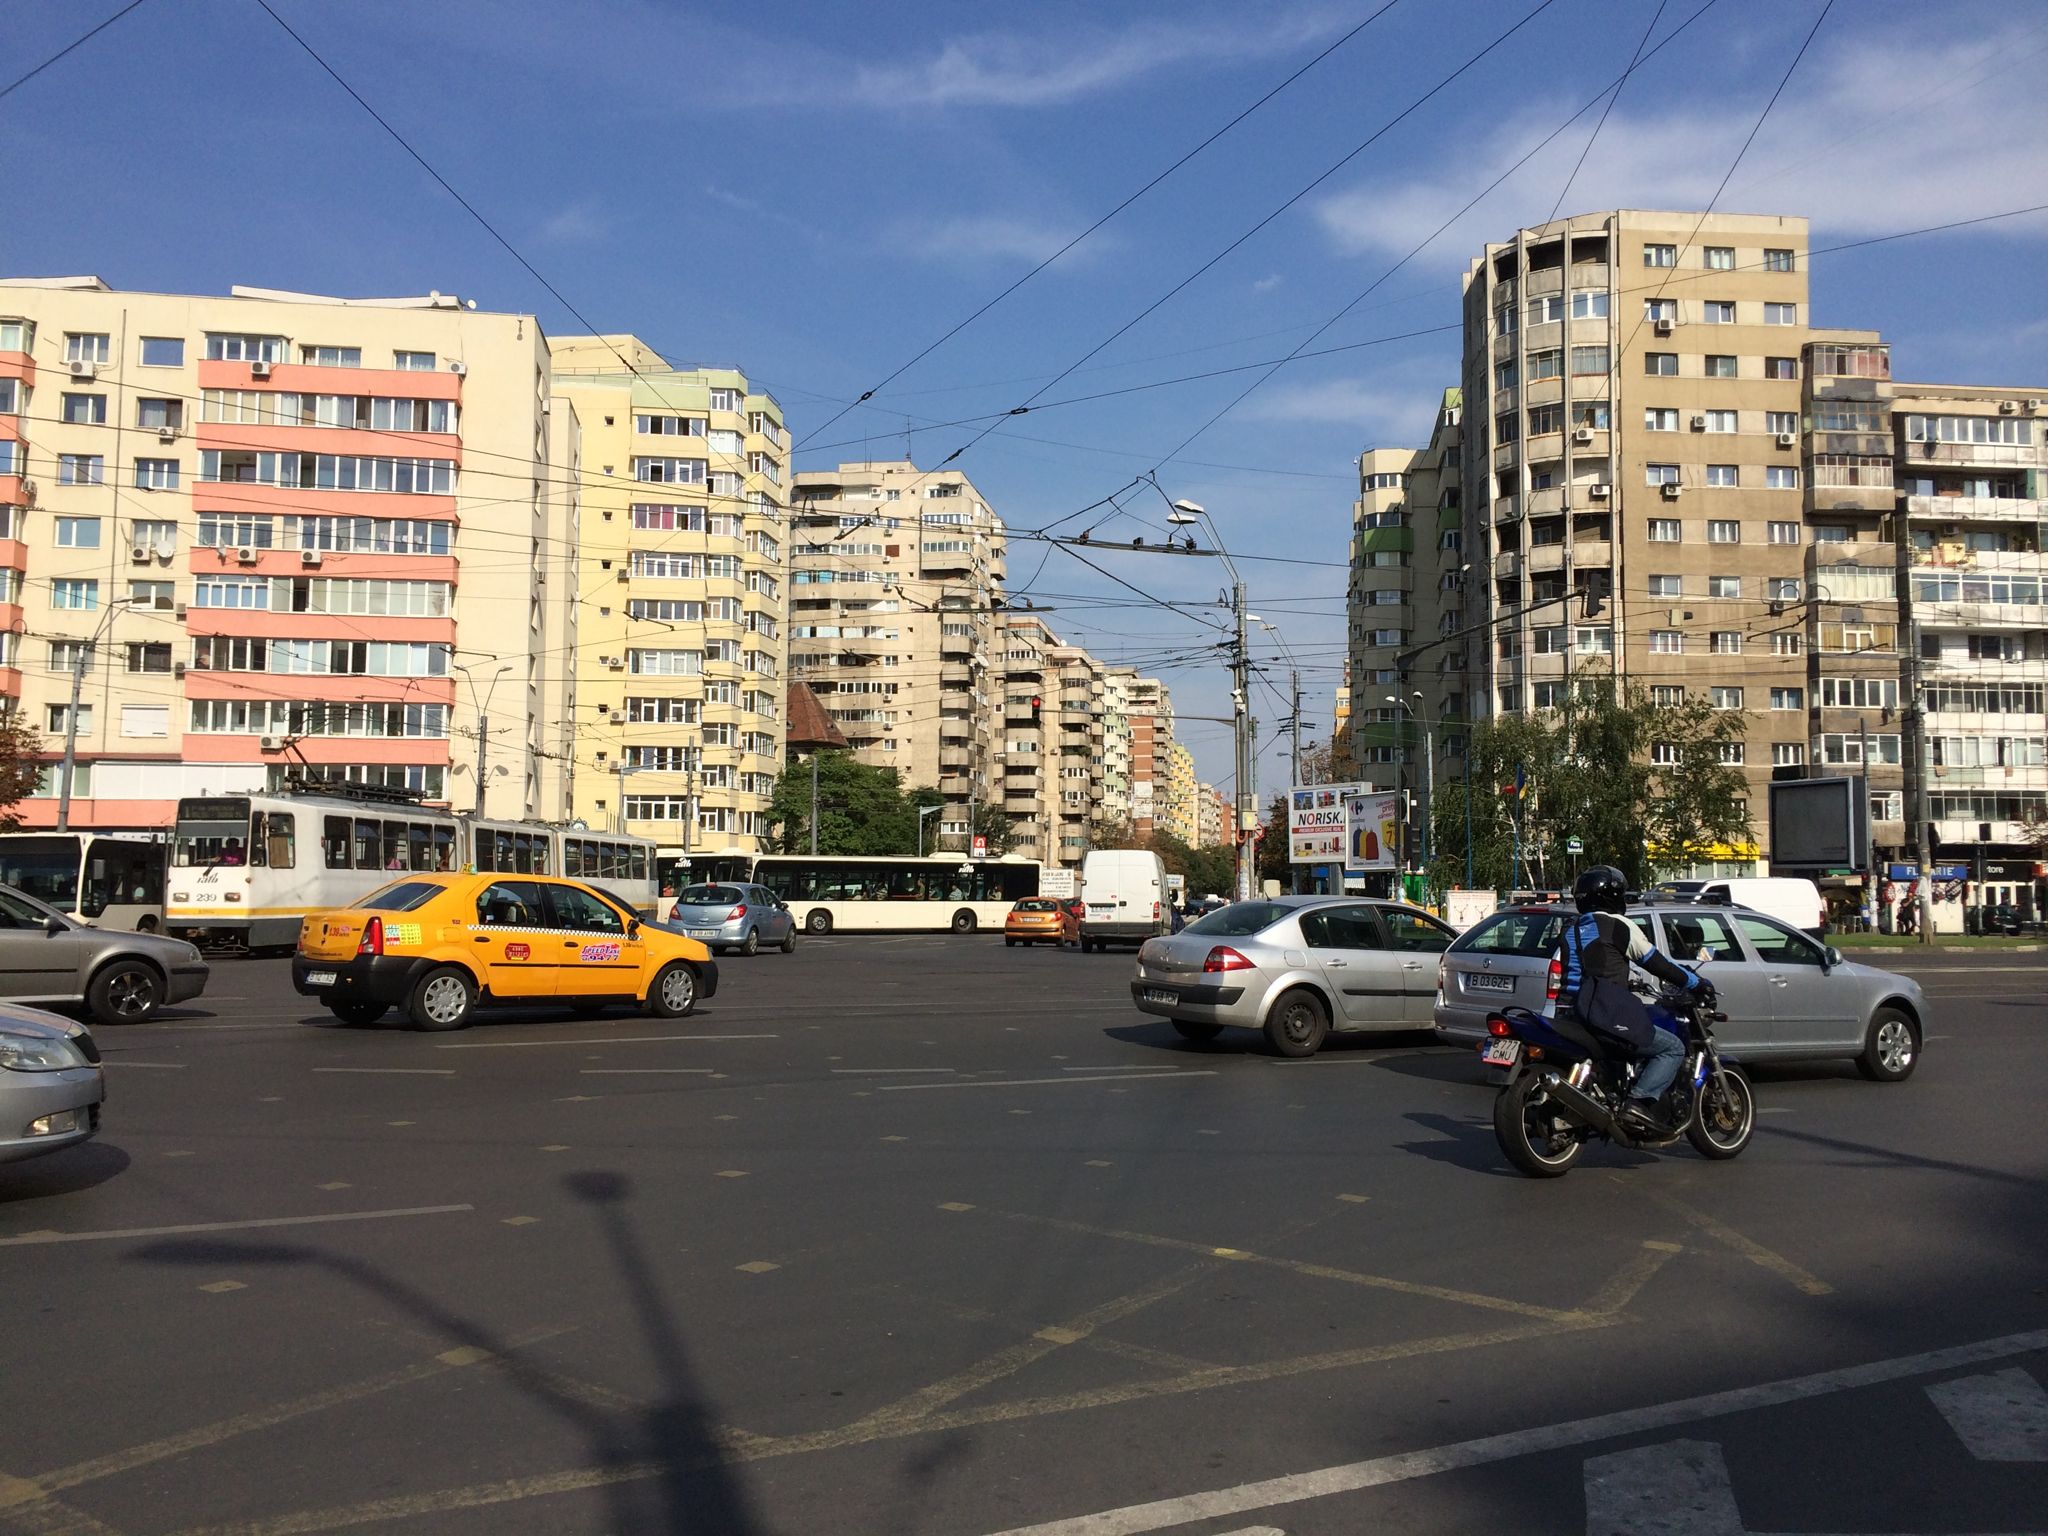 Photo 128 of 133 from the album Highlights Bucharest 2014.